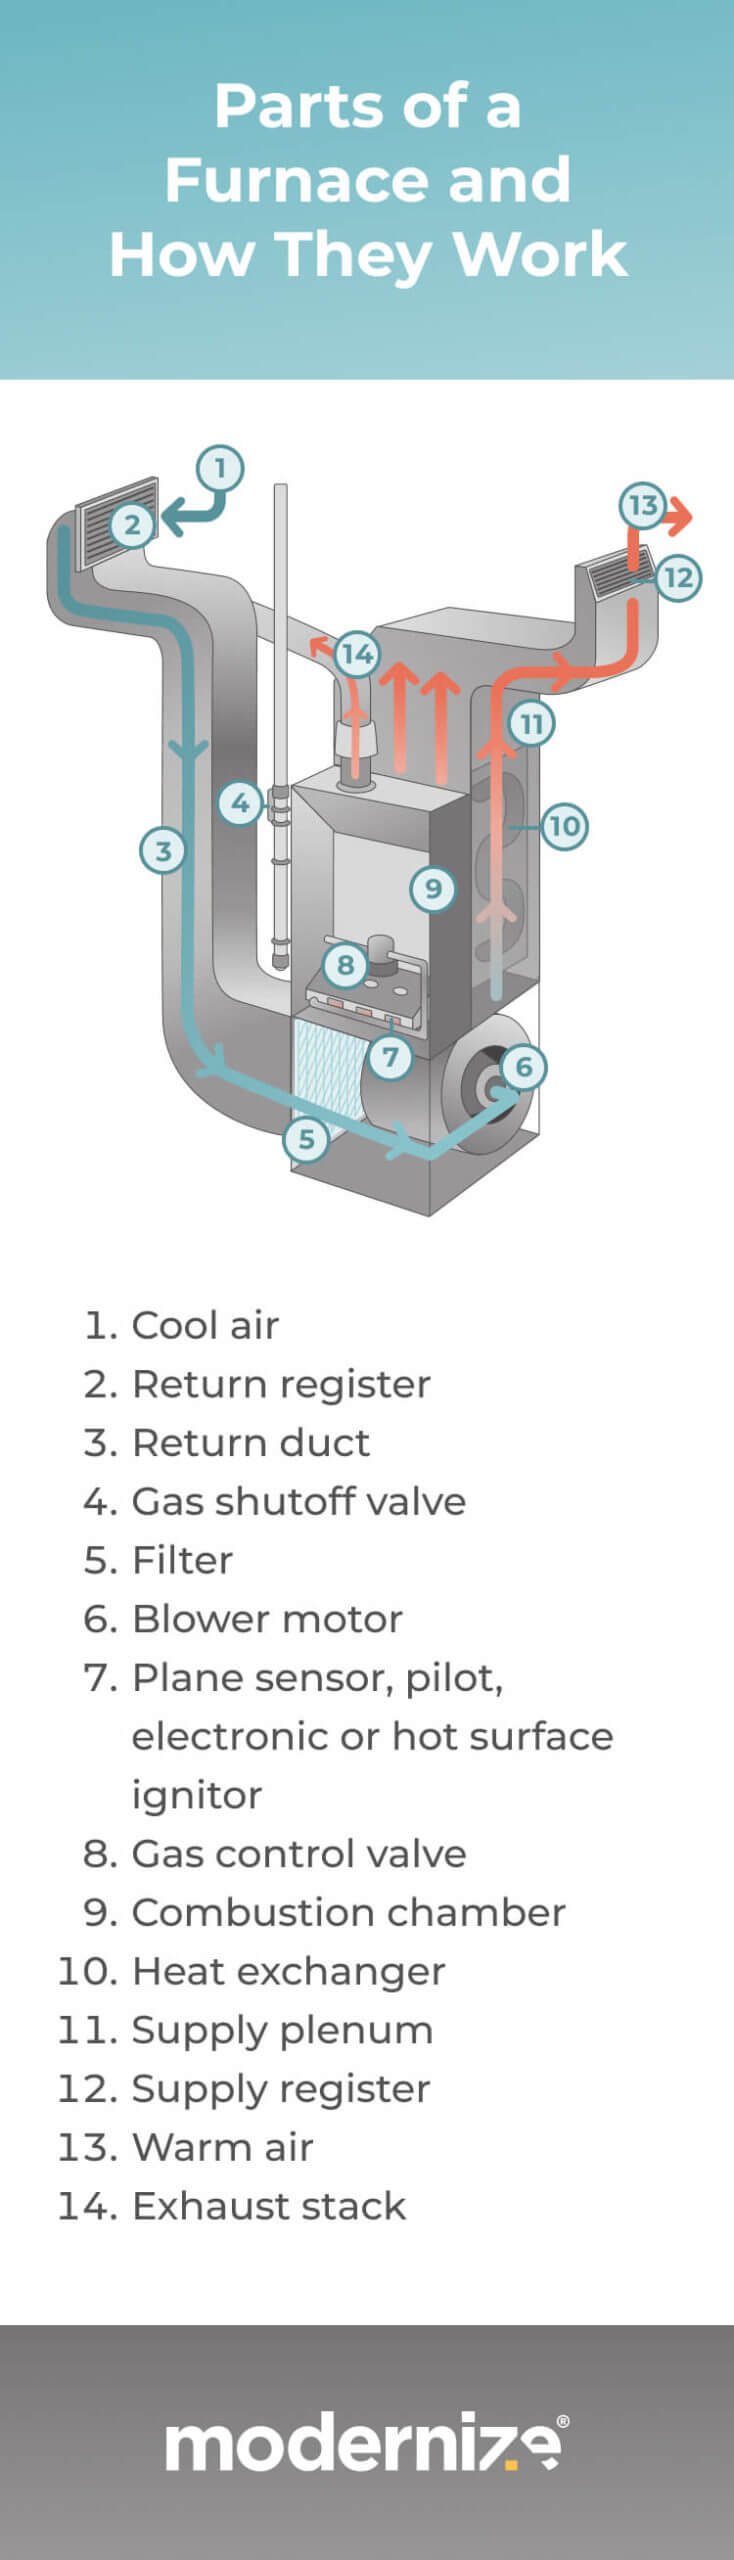 What Is a Furnace?